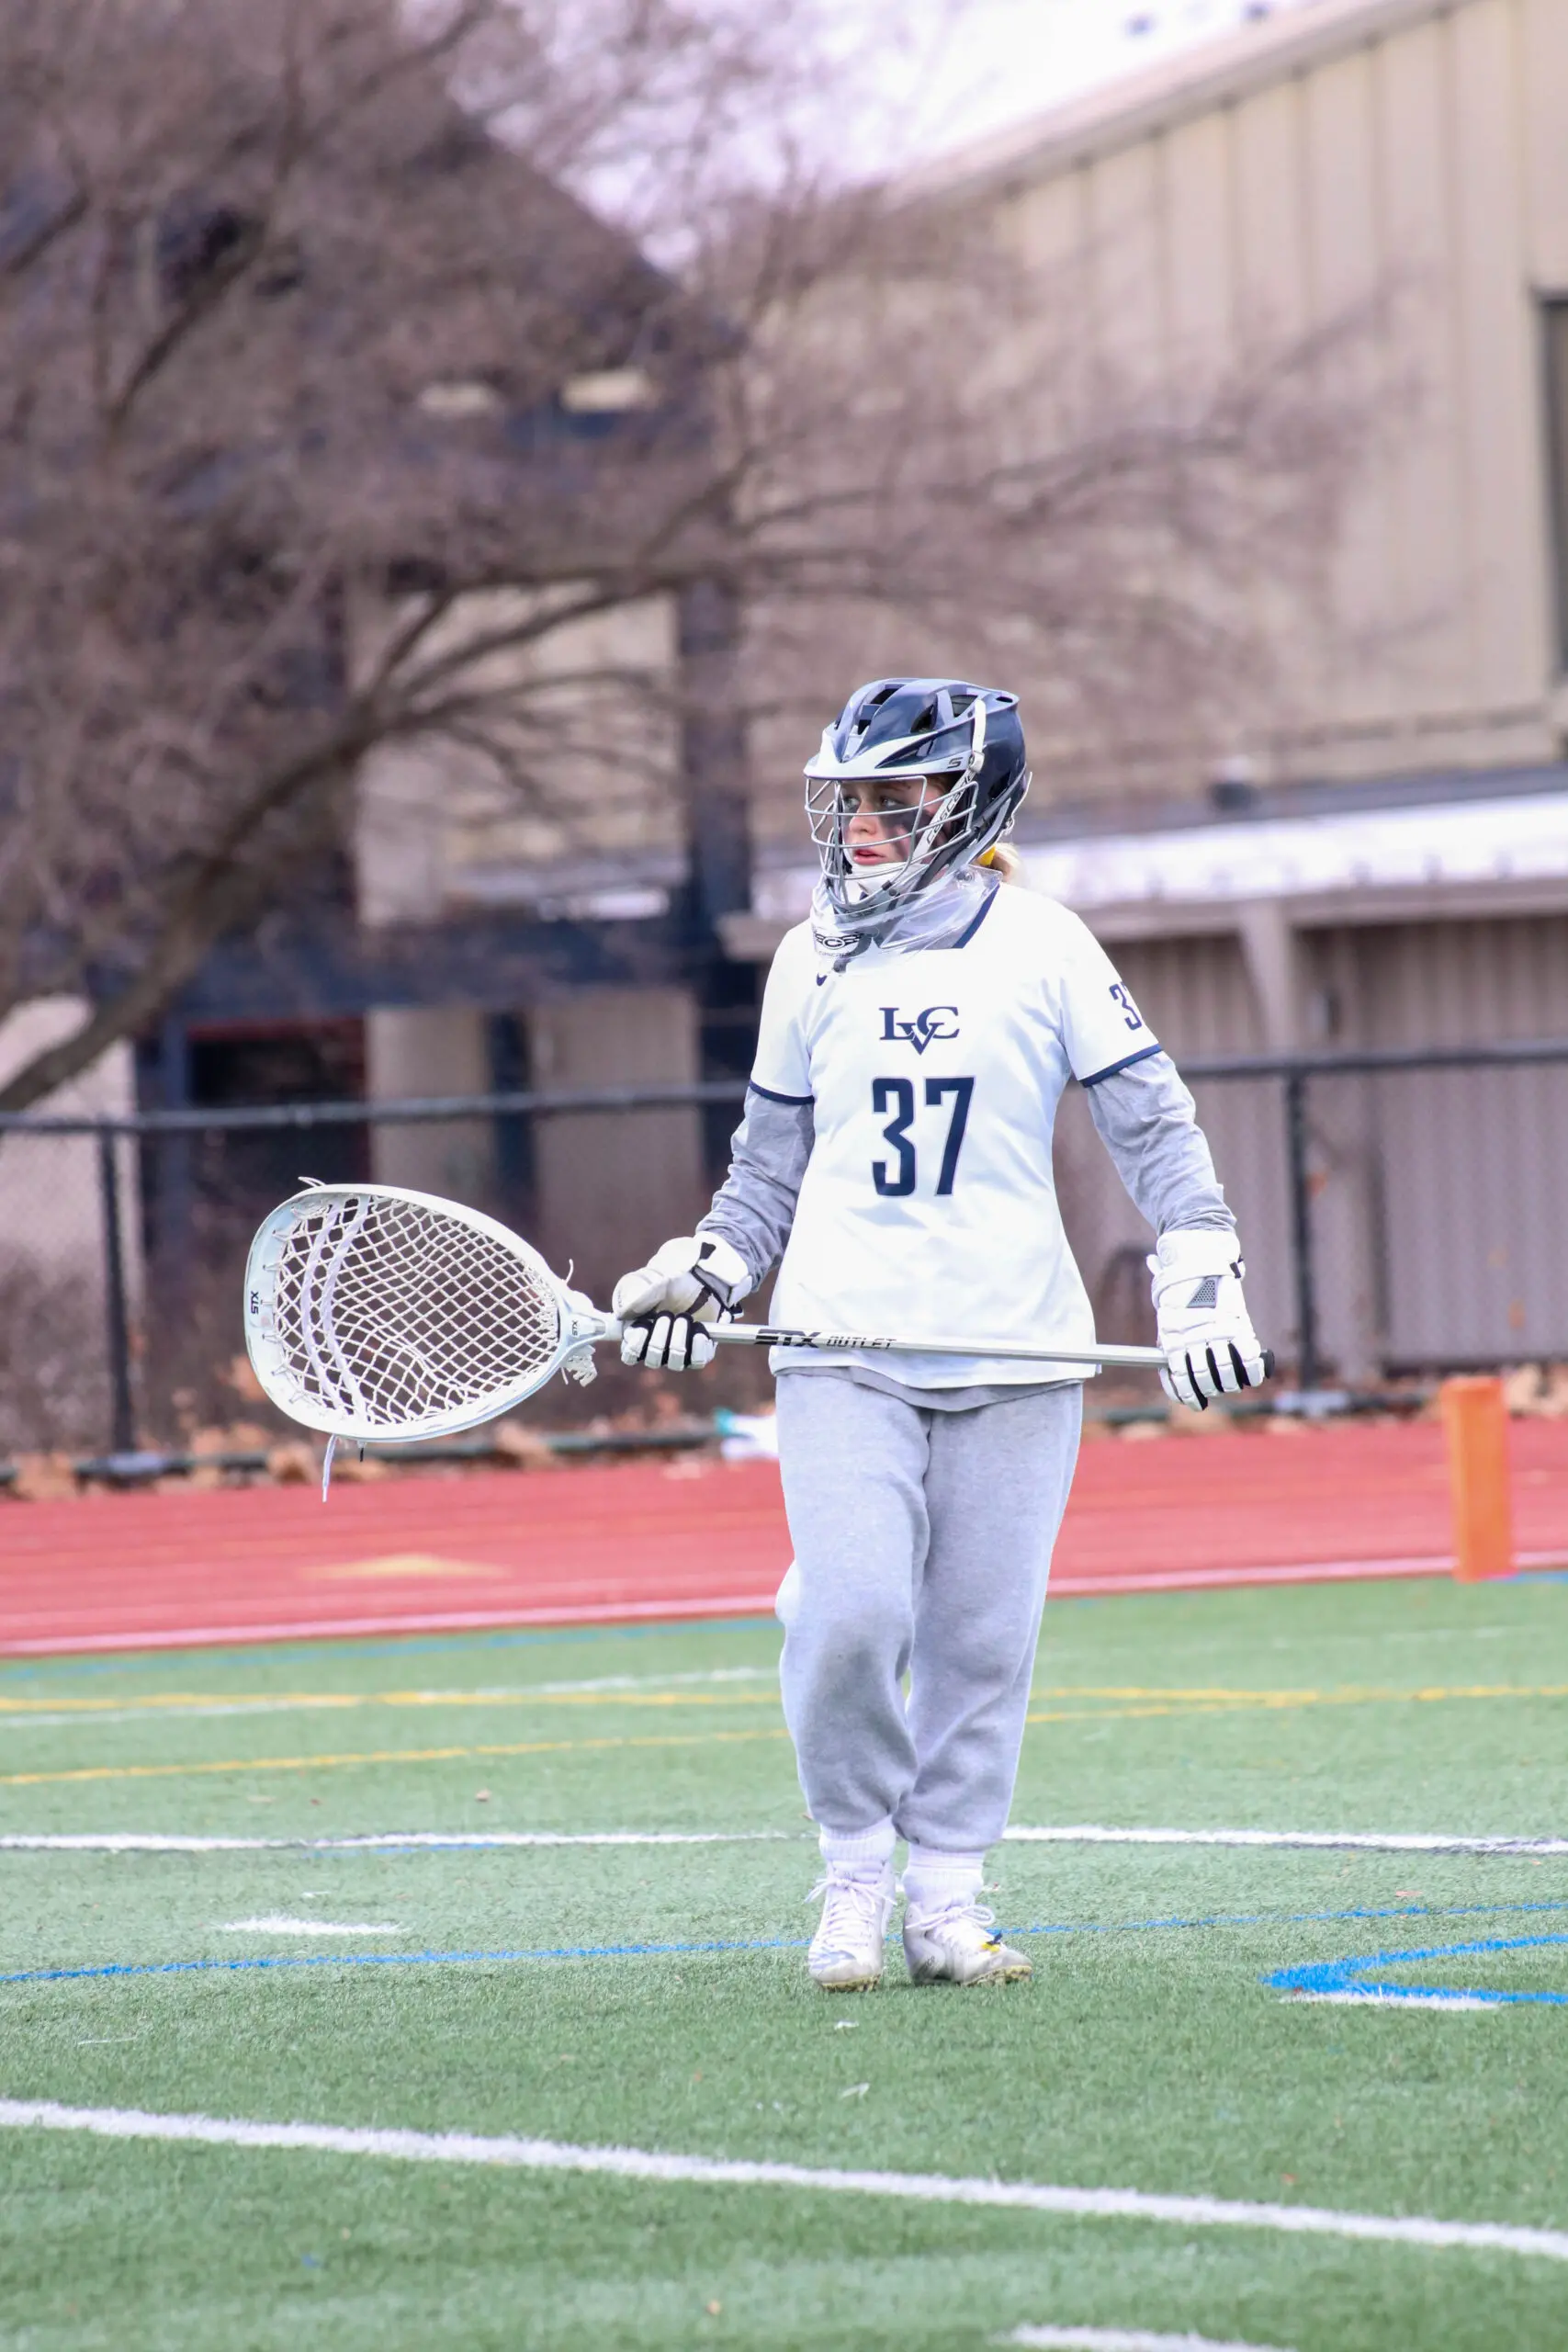 An LVC women's lacrosse player stands on the field.